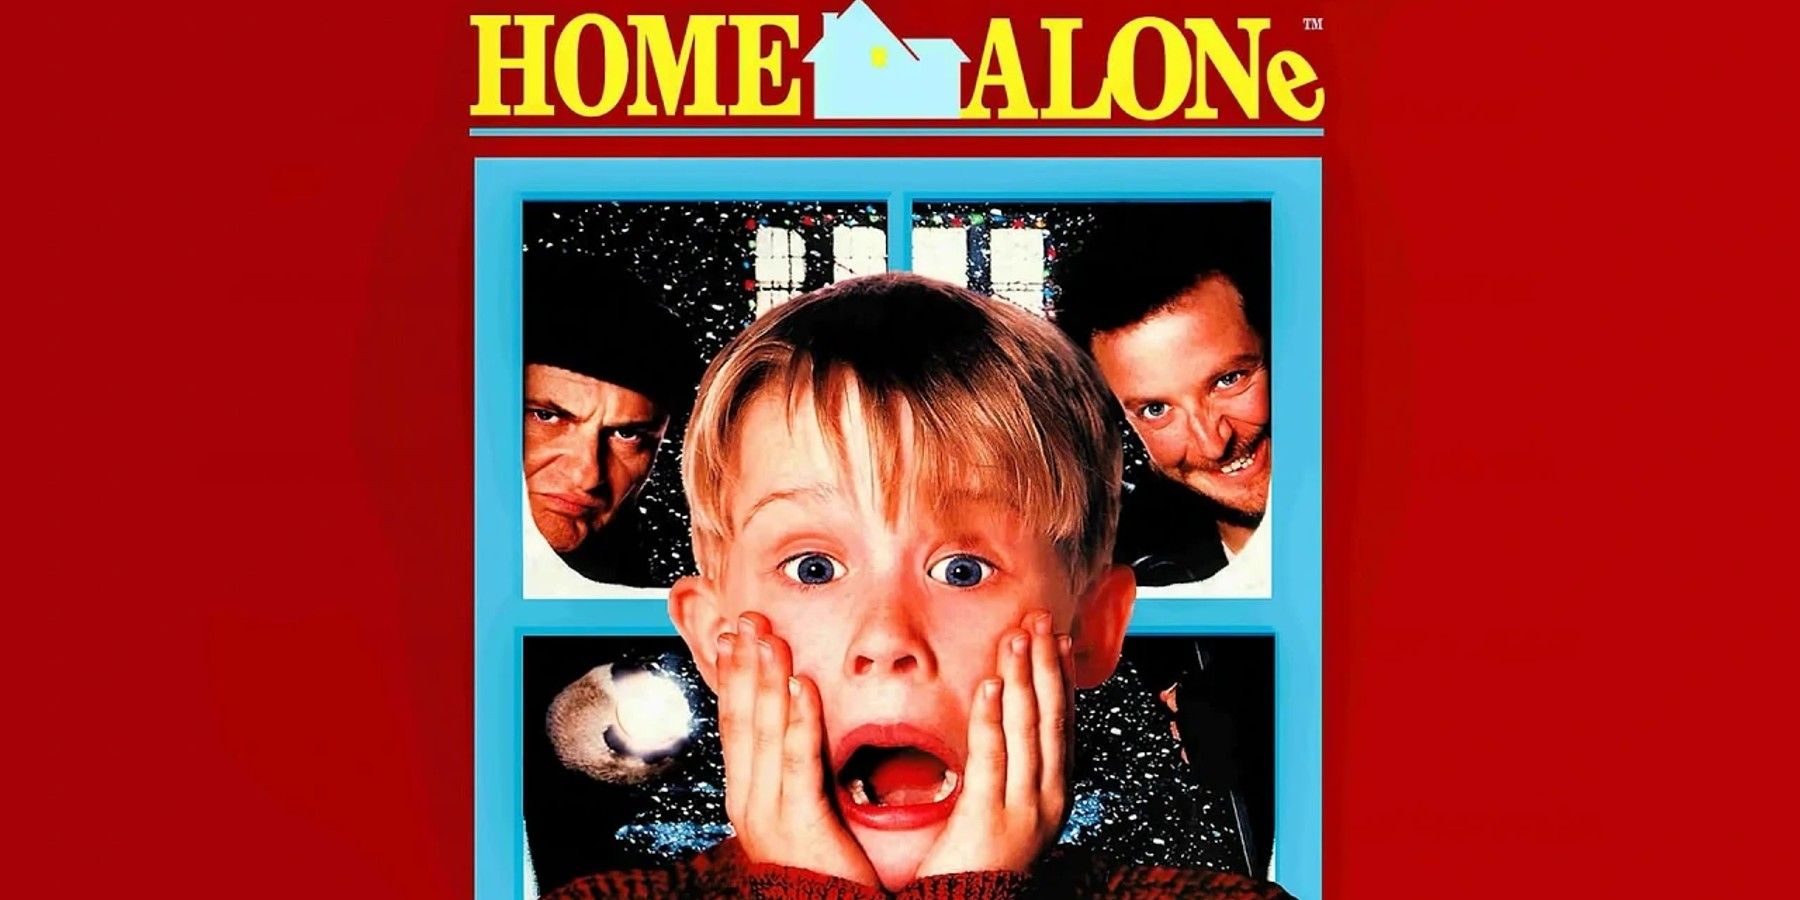 Home Alone Game